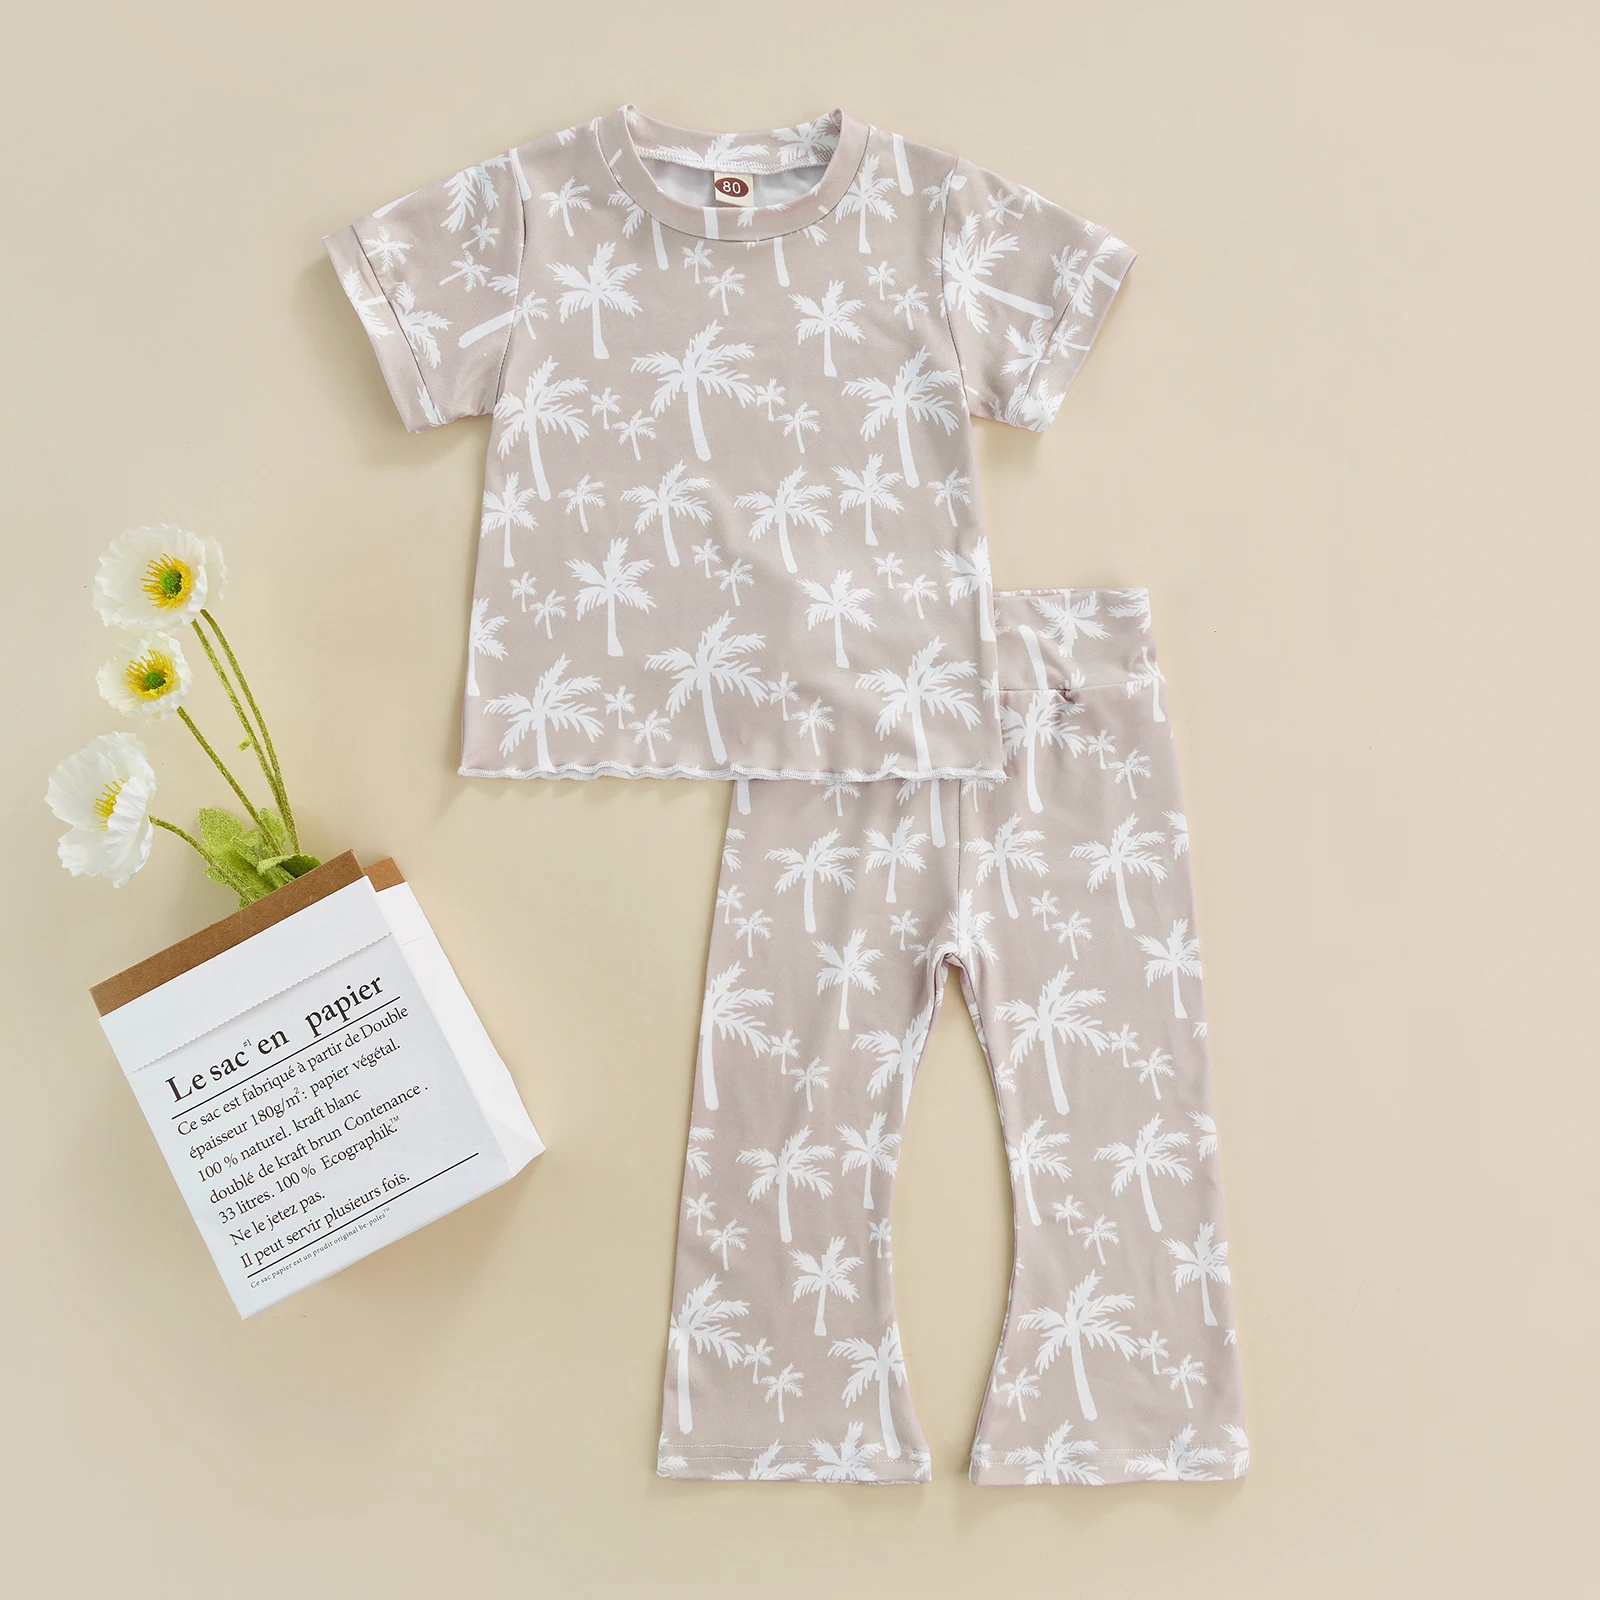 baby clothing sets	 2022 1-6Y Summer Kids Girl Boy Clothing Coconut Tree Print Round Neck Short Sleeve T-shirt+Pants Casual Toddler Outfits 2pcs Set dress up time princess clothing sets